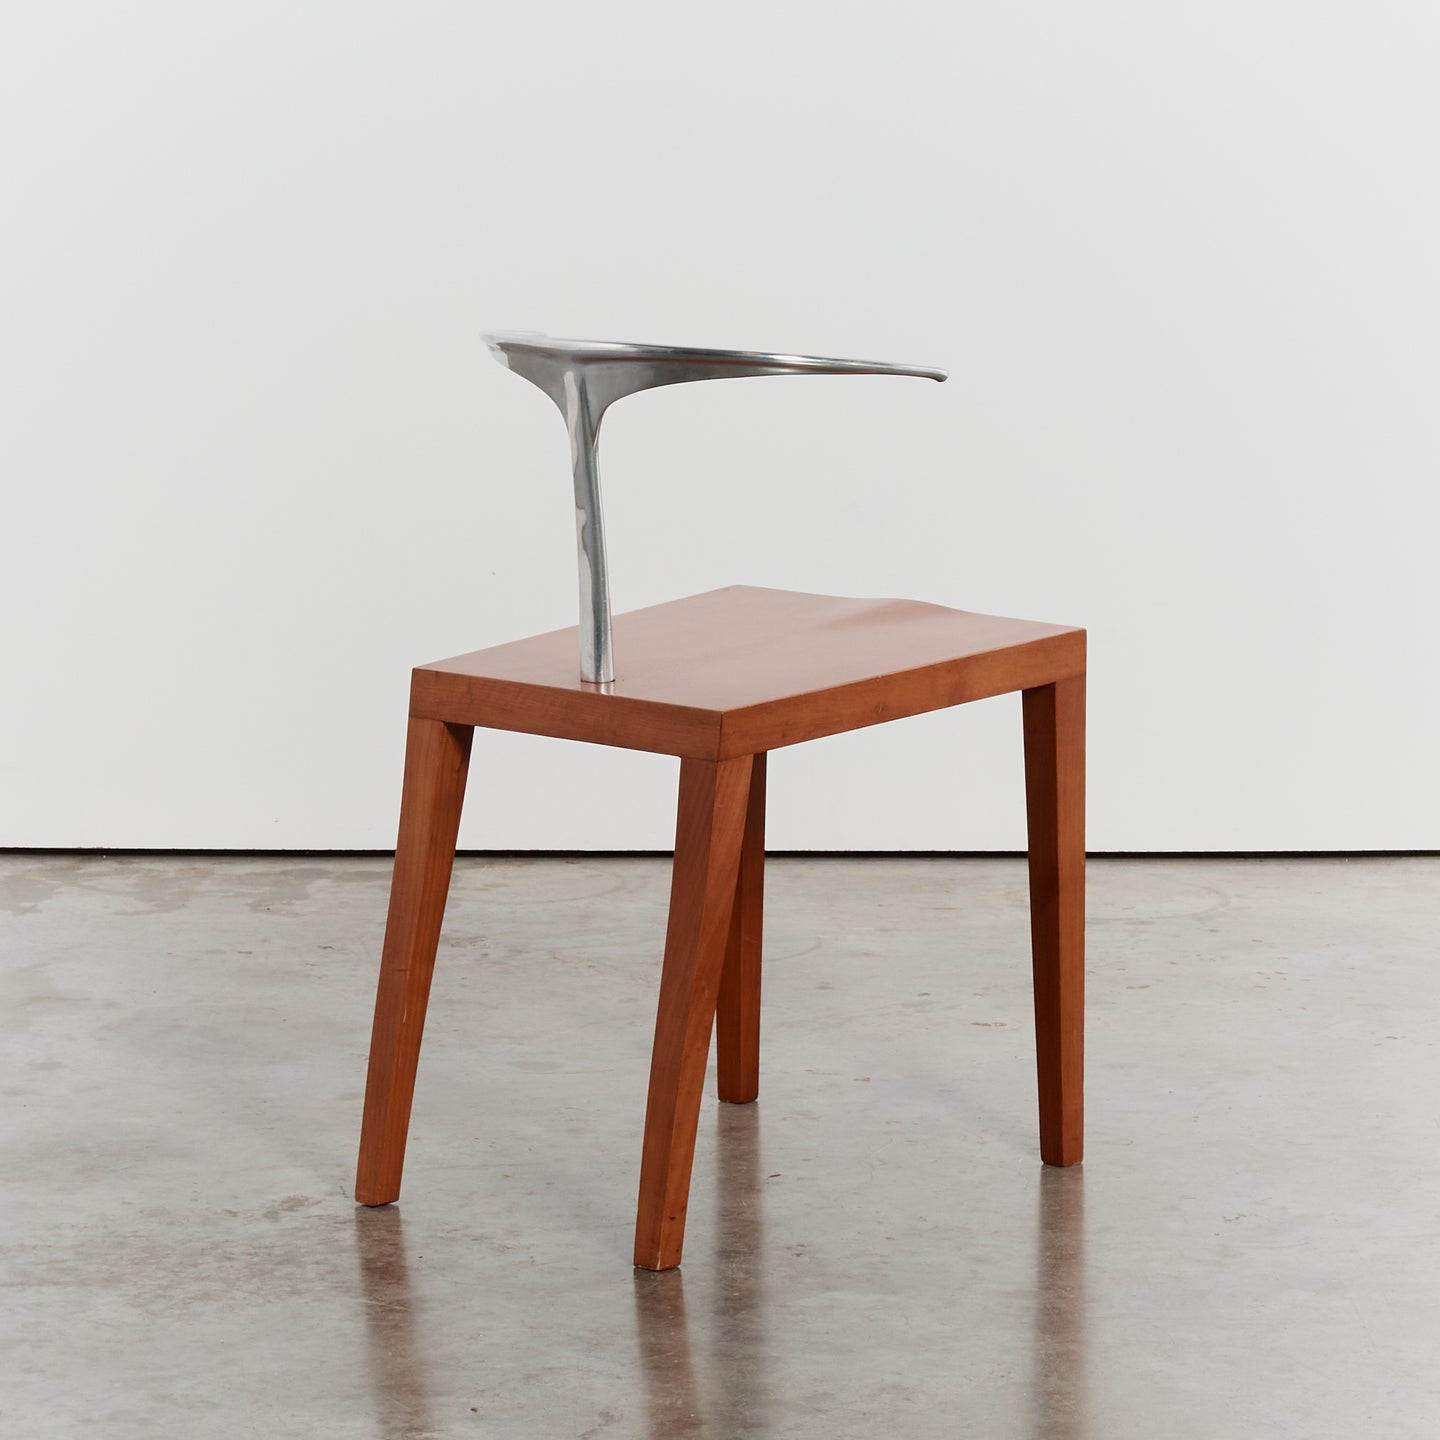 Royalton chair by Philippe Starck for Aleph